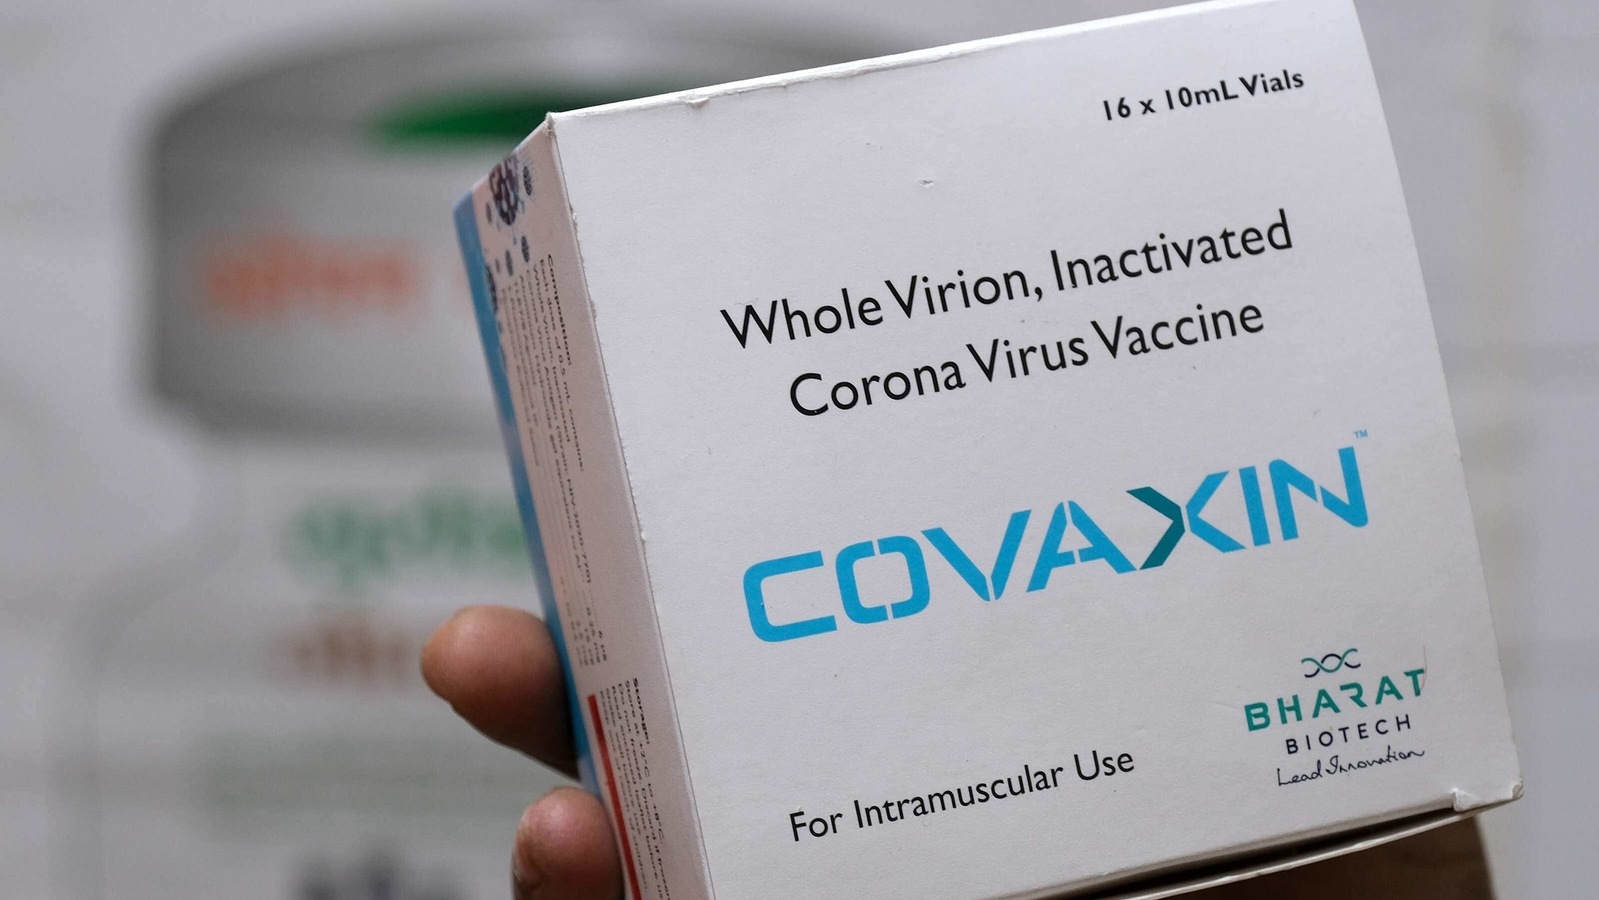 Nepal becomes 3rd country to give emergency nod to Covaxin